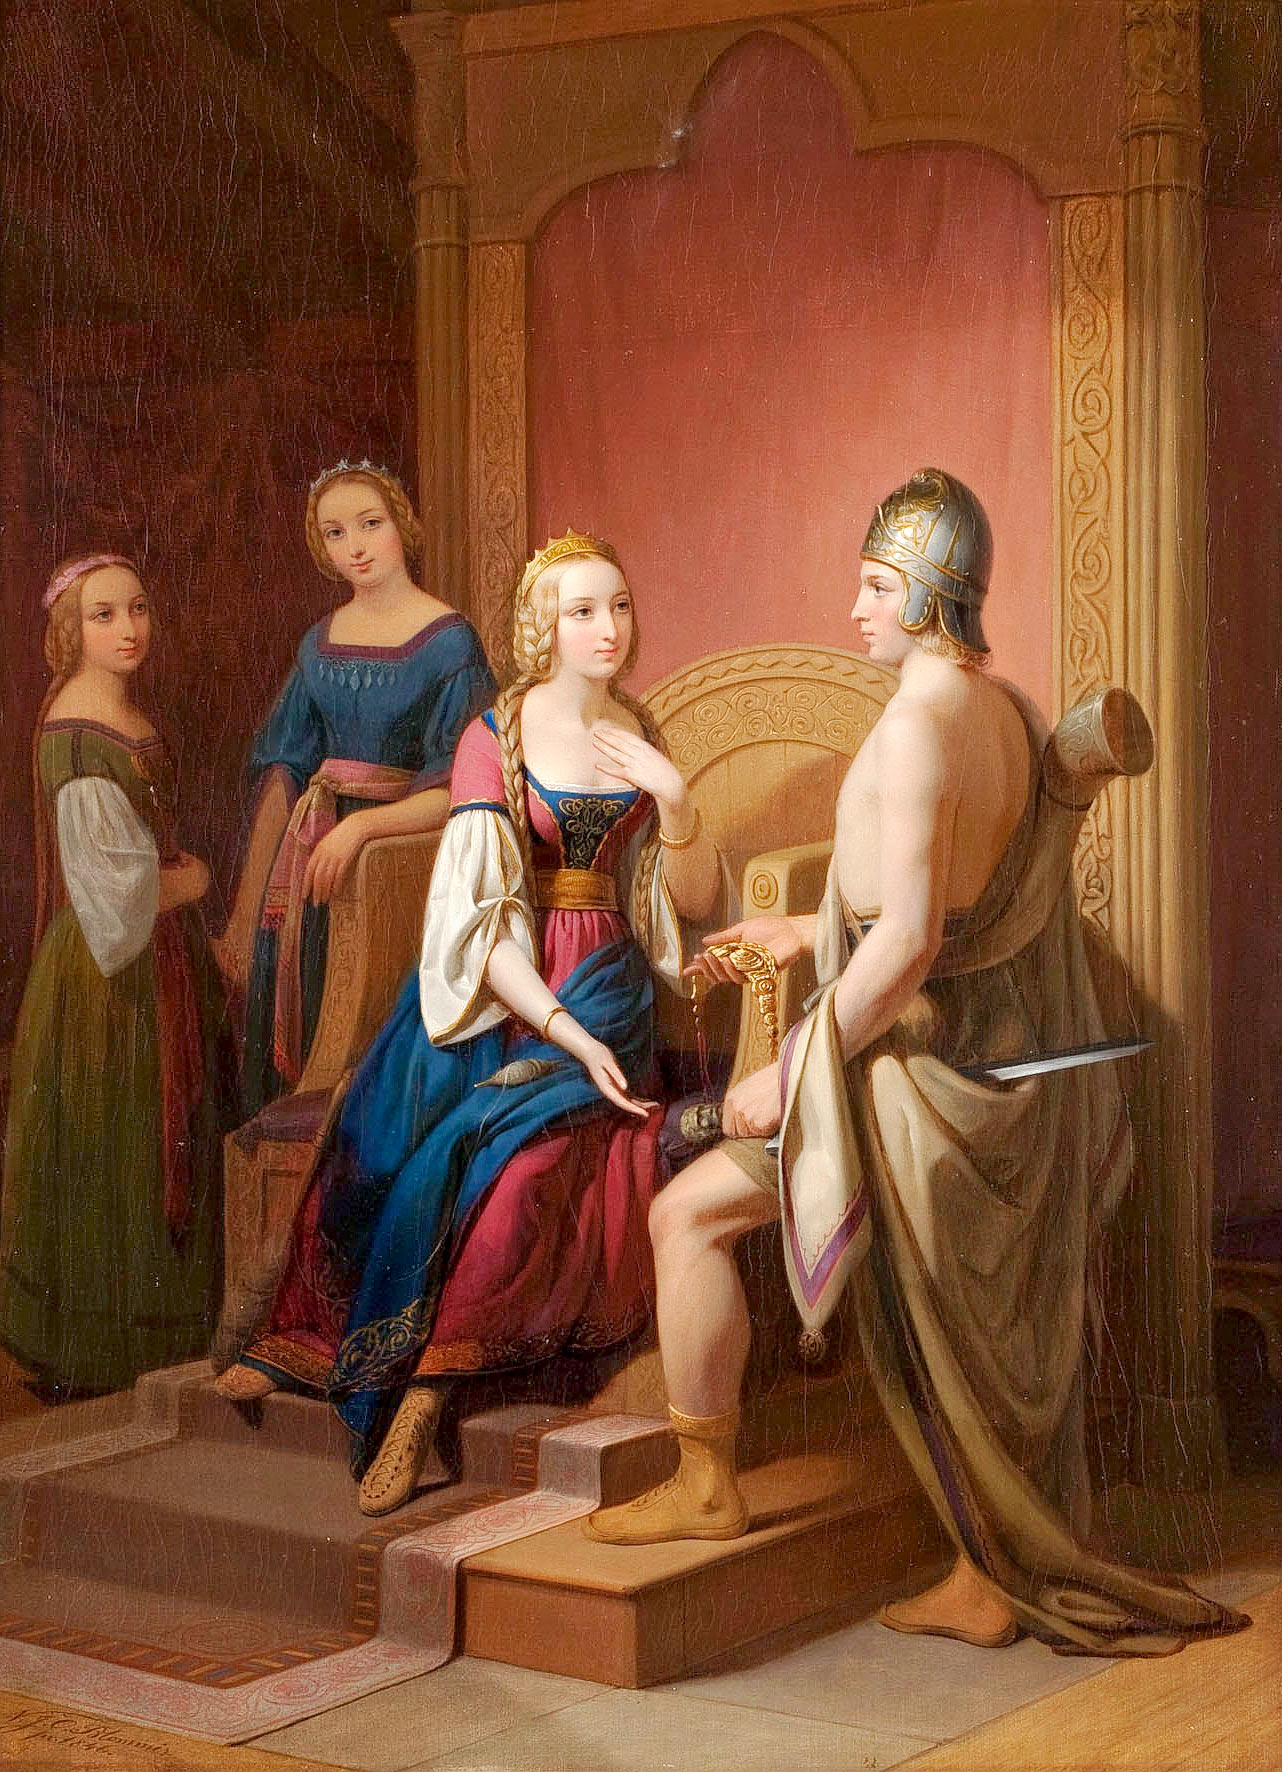 A knight presenting a necklace to a queen seated on a throne